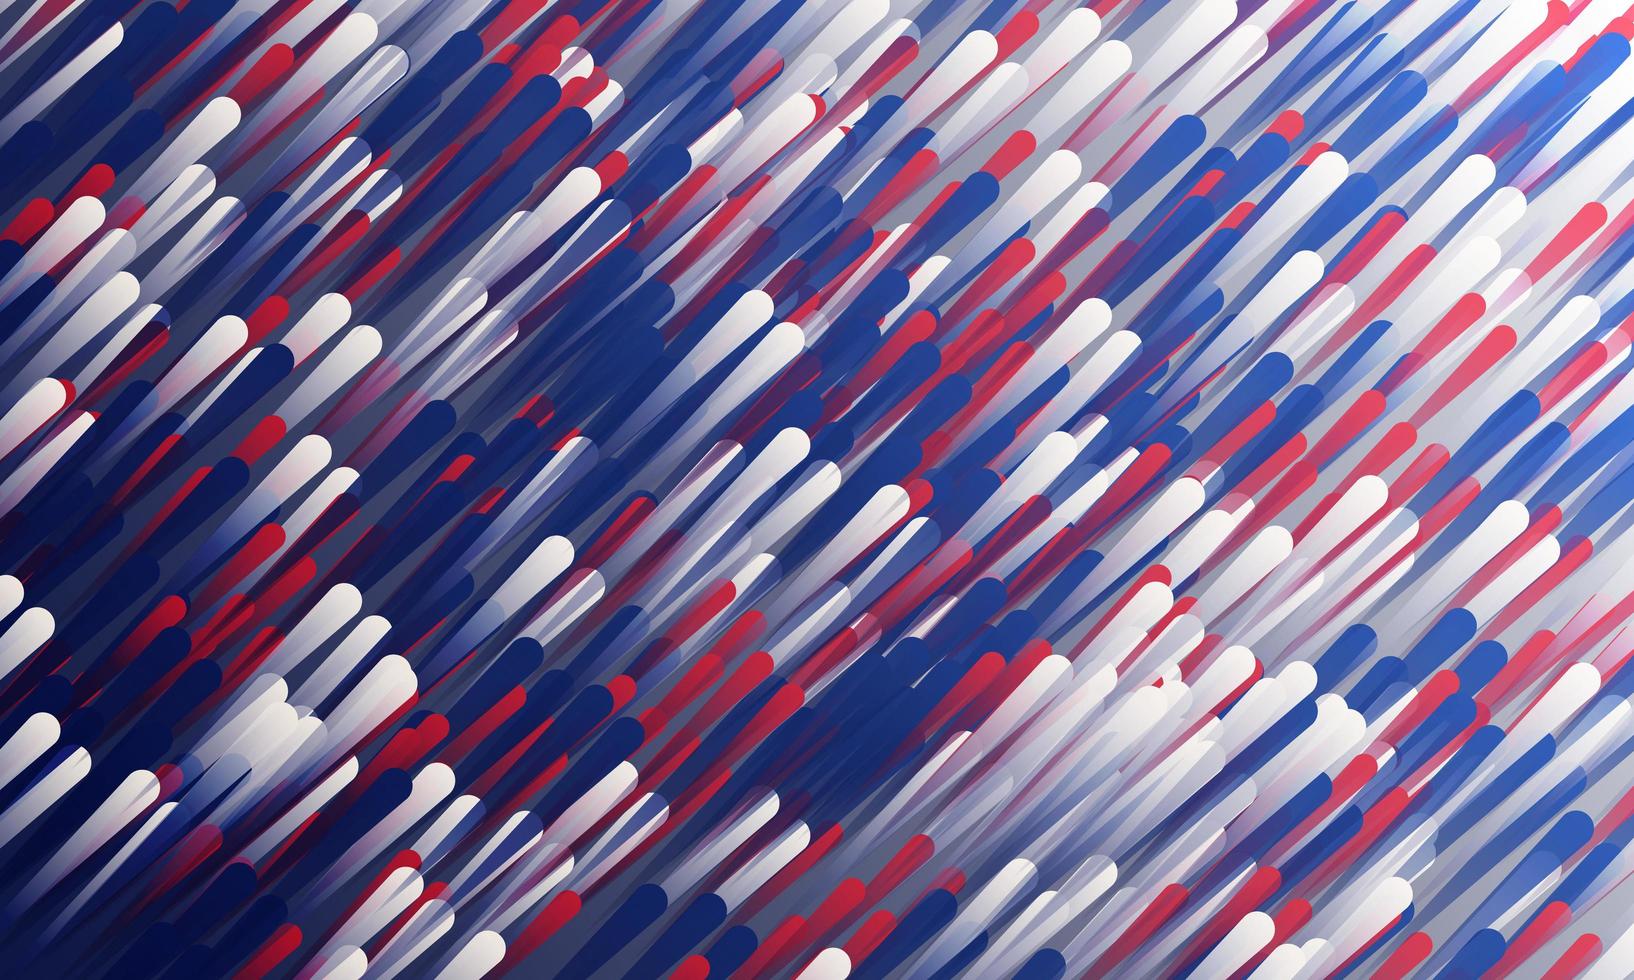 Red, white and blue angled dynamic lines desgin vector